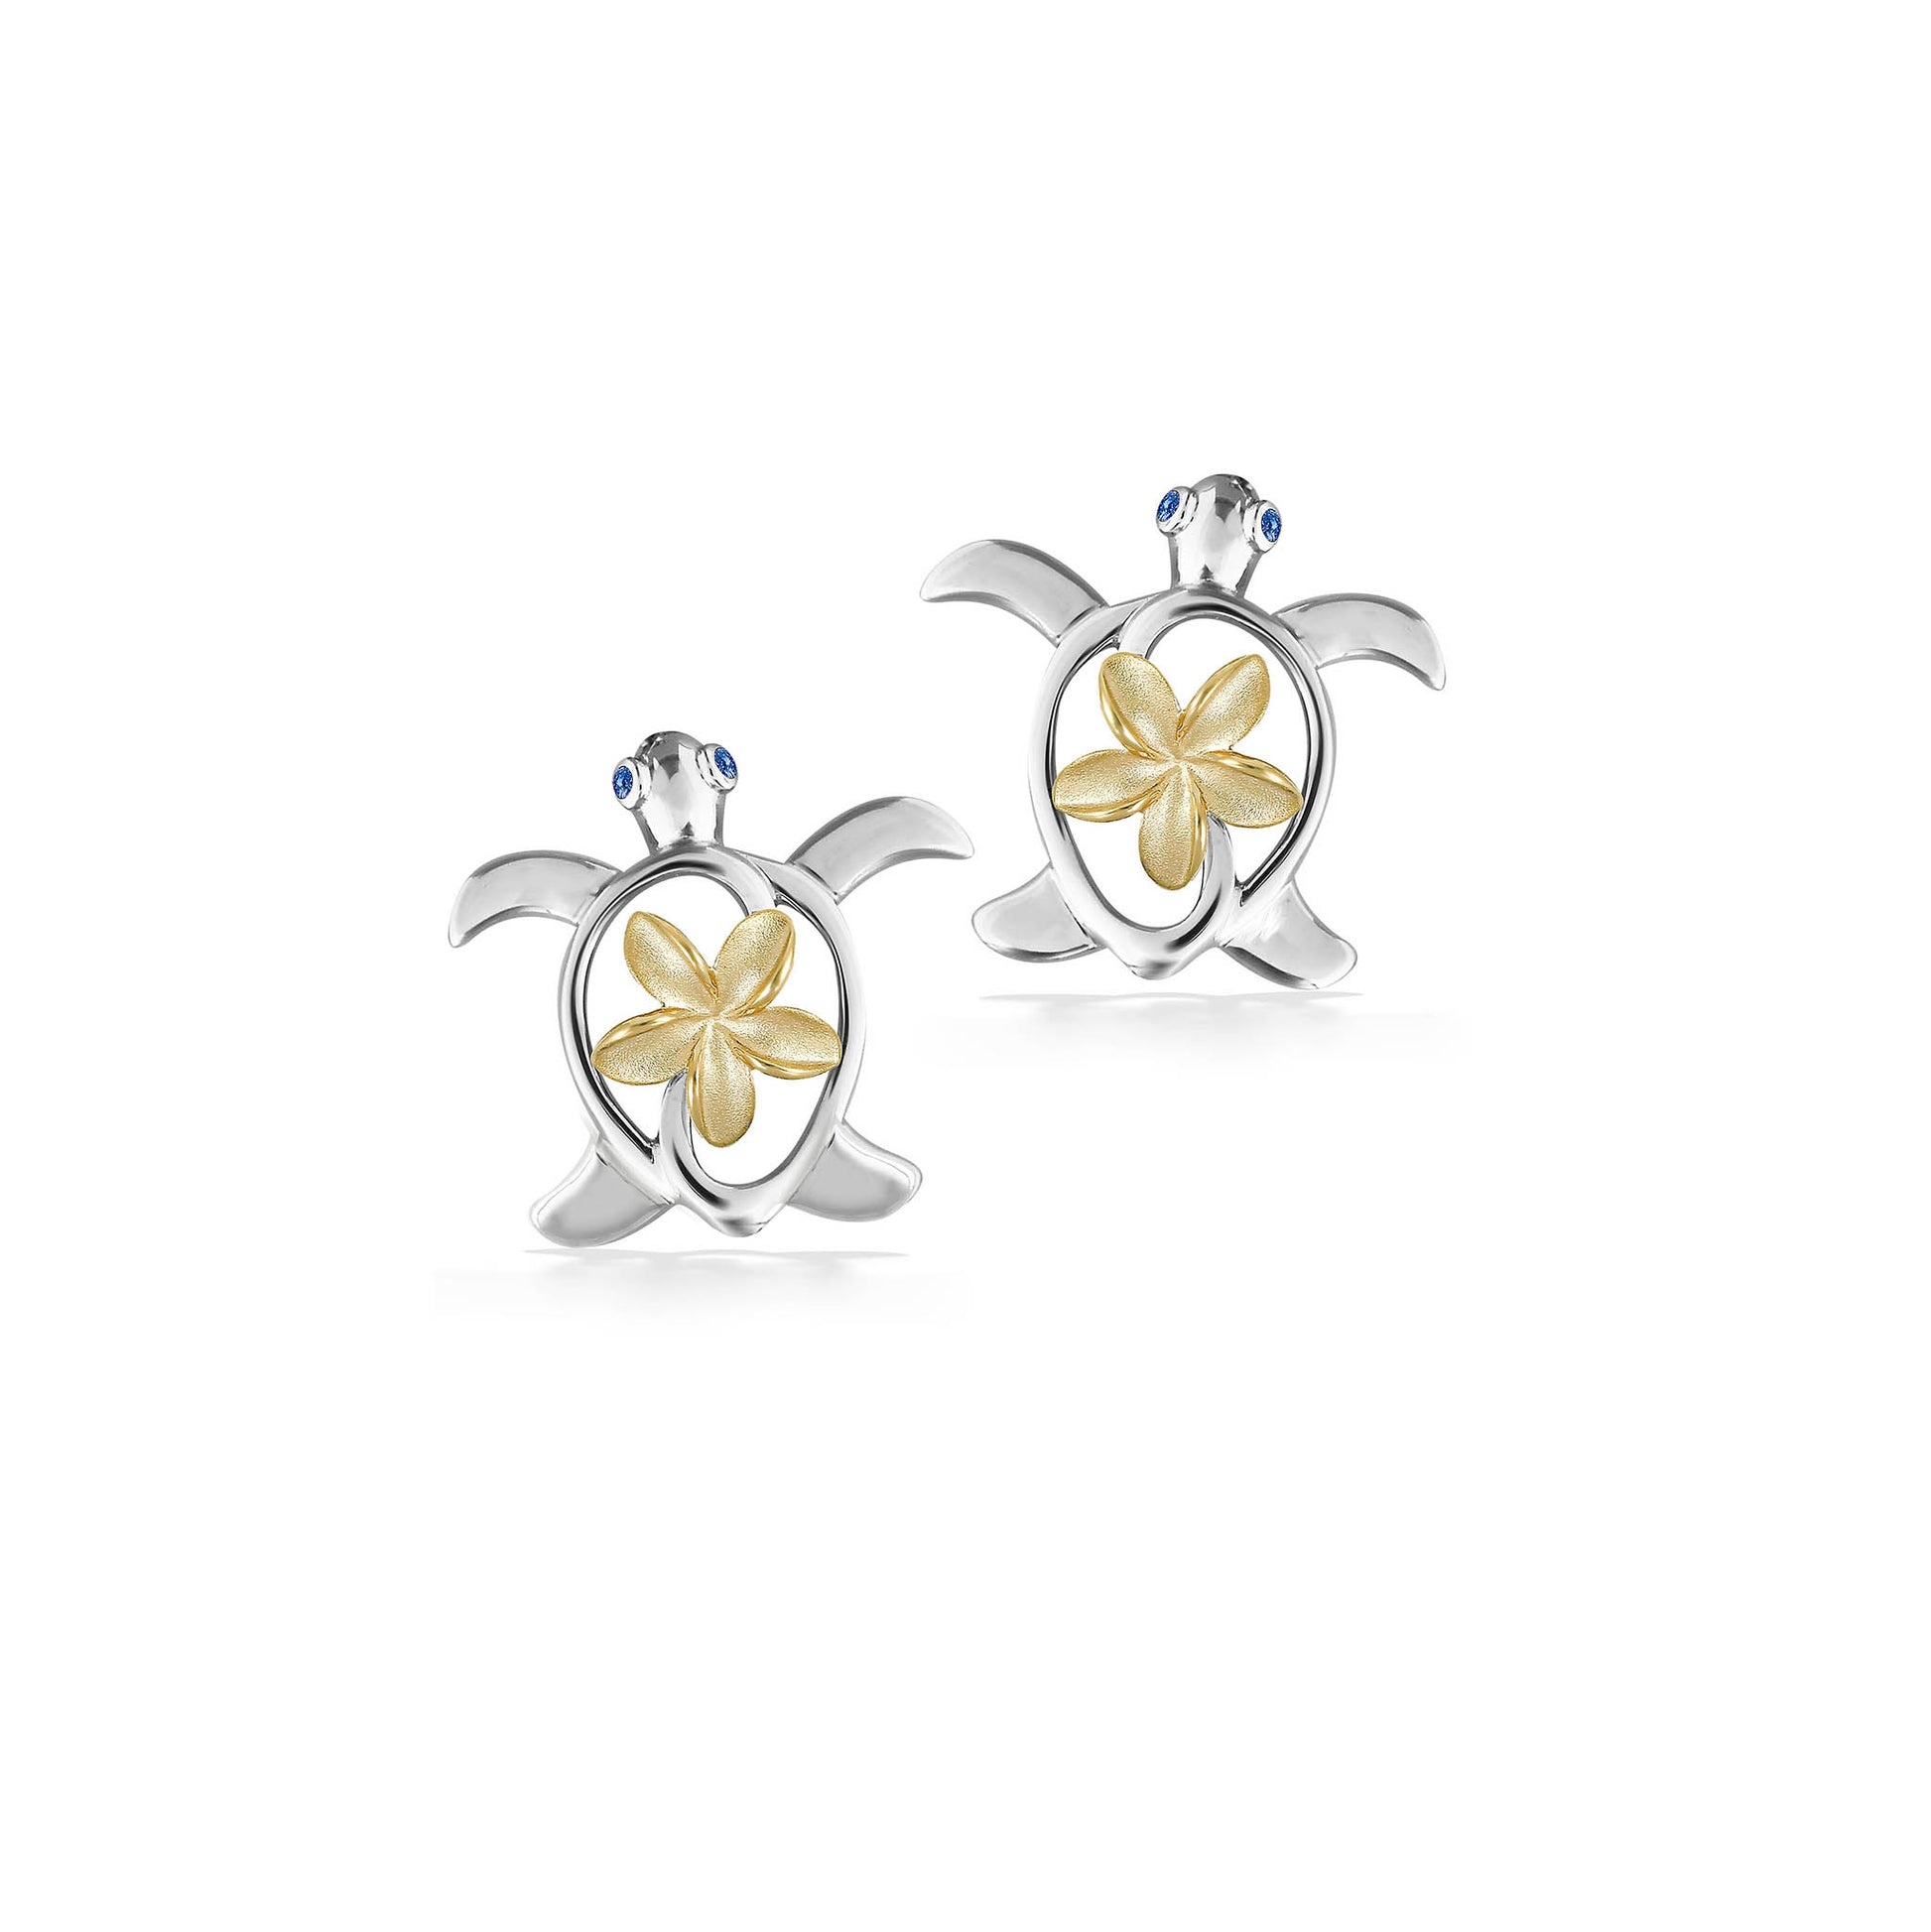 44391 - 14K Yellow Gold and Sterling Silver - Honu and Plumeria Stud Earrings